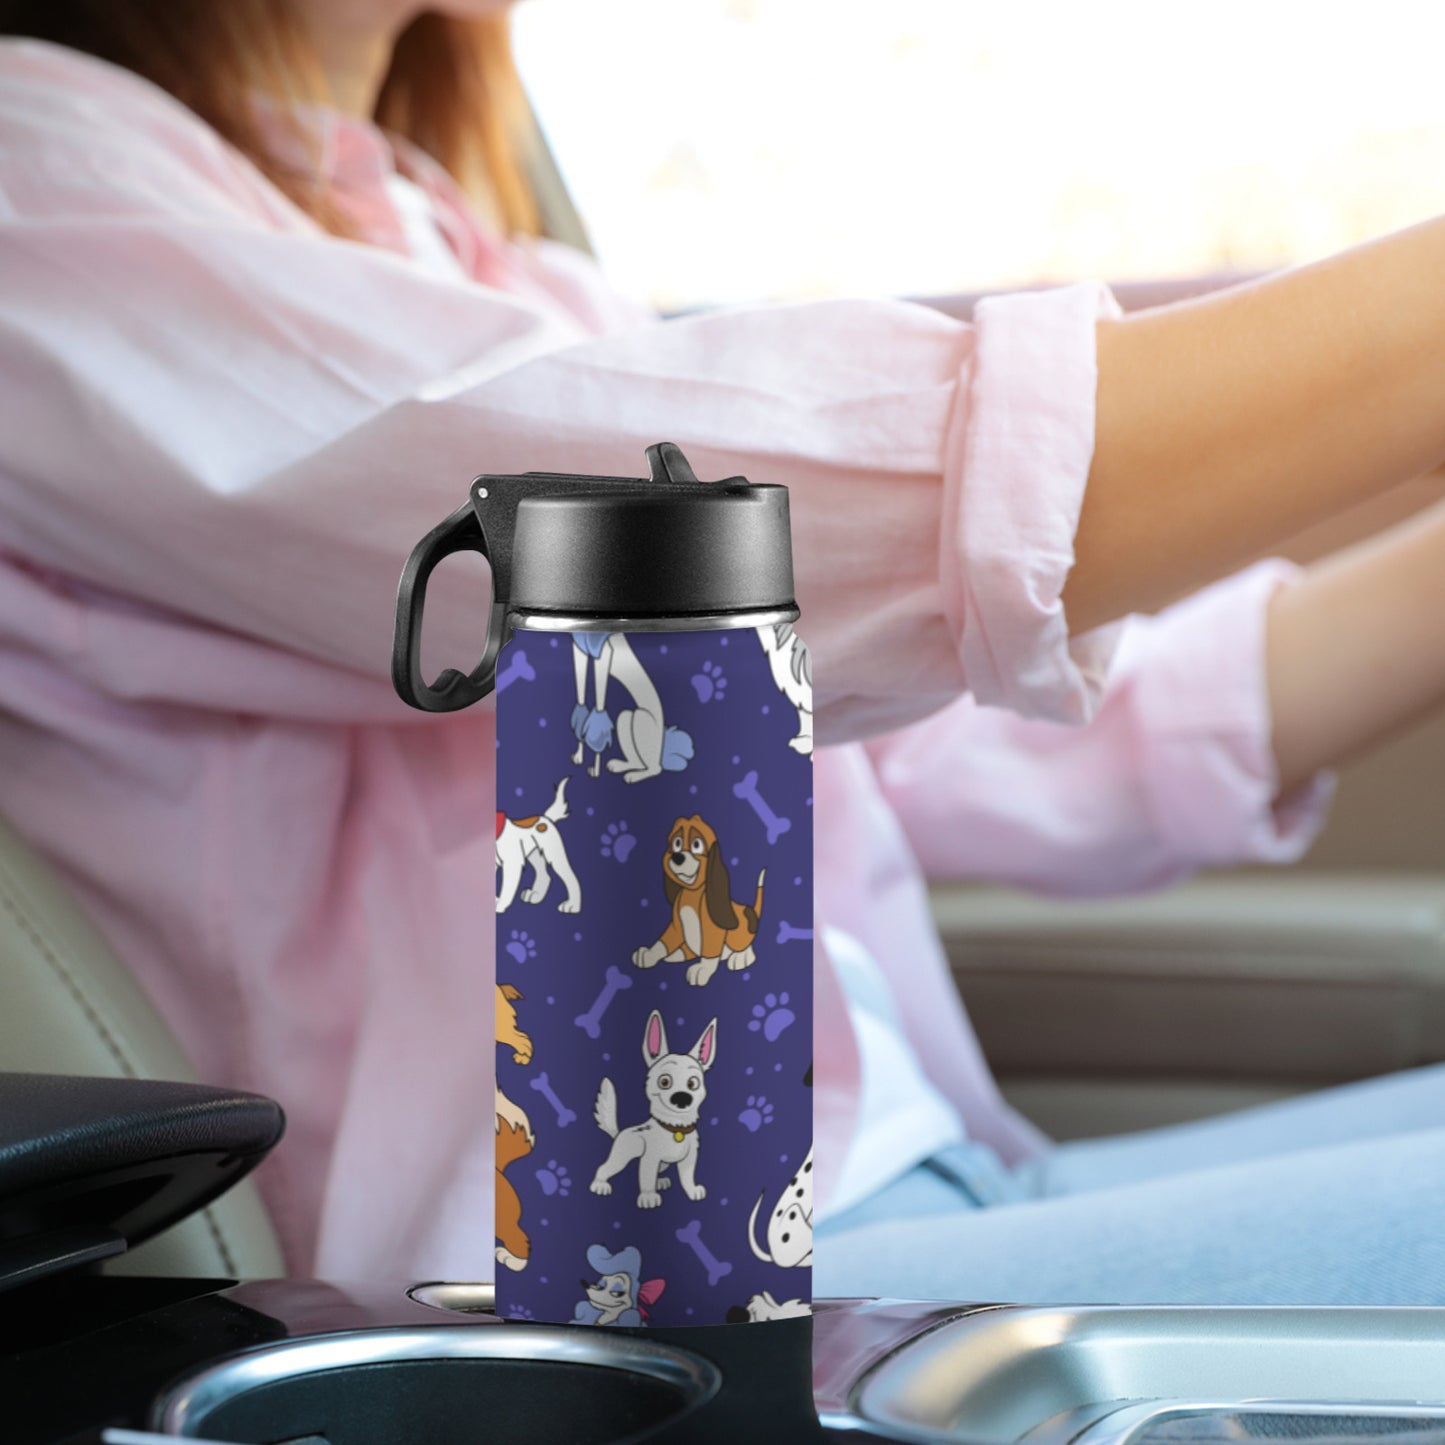 Dog Favorites Insulated Water Bottle